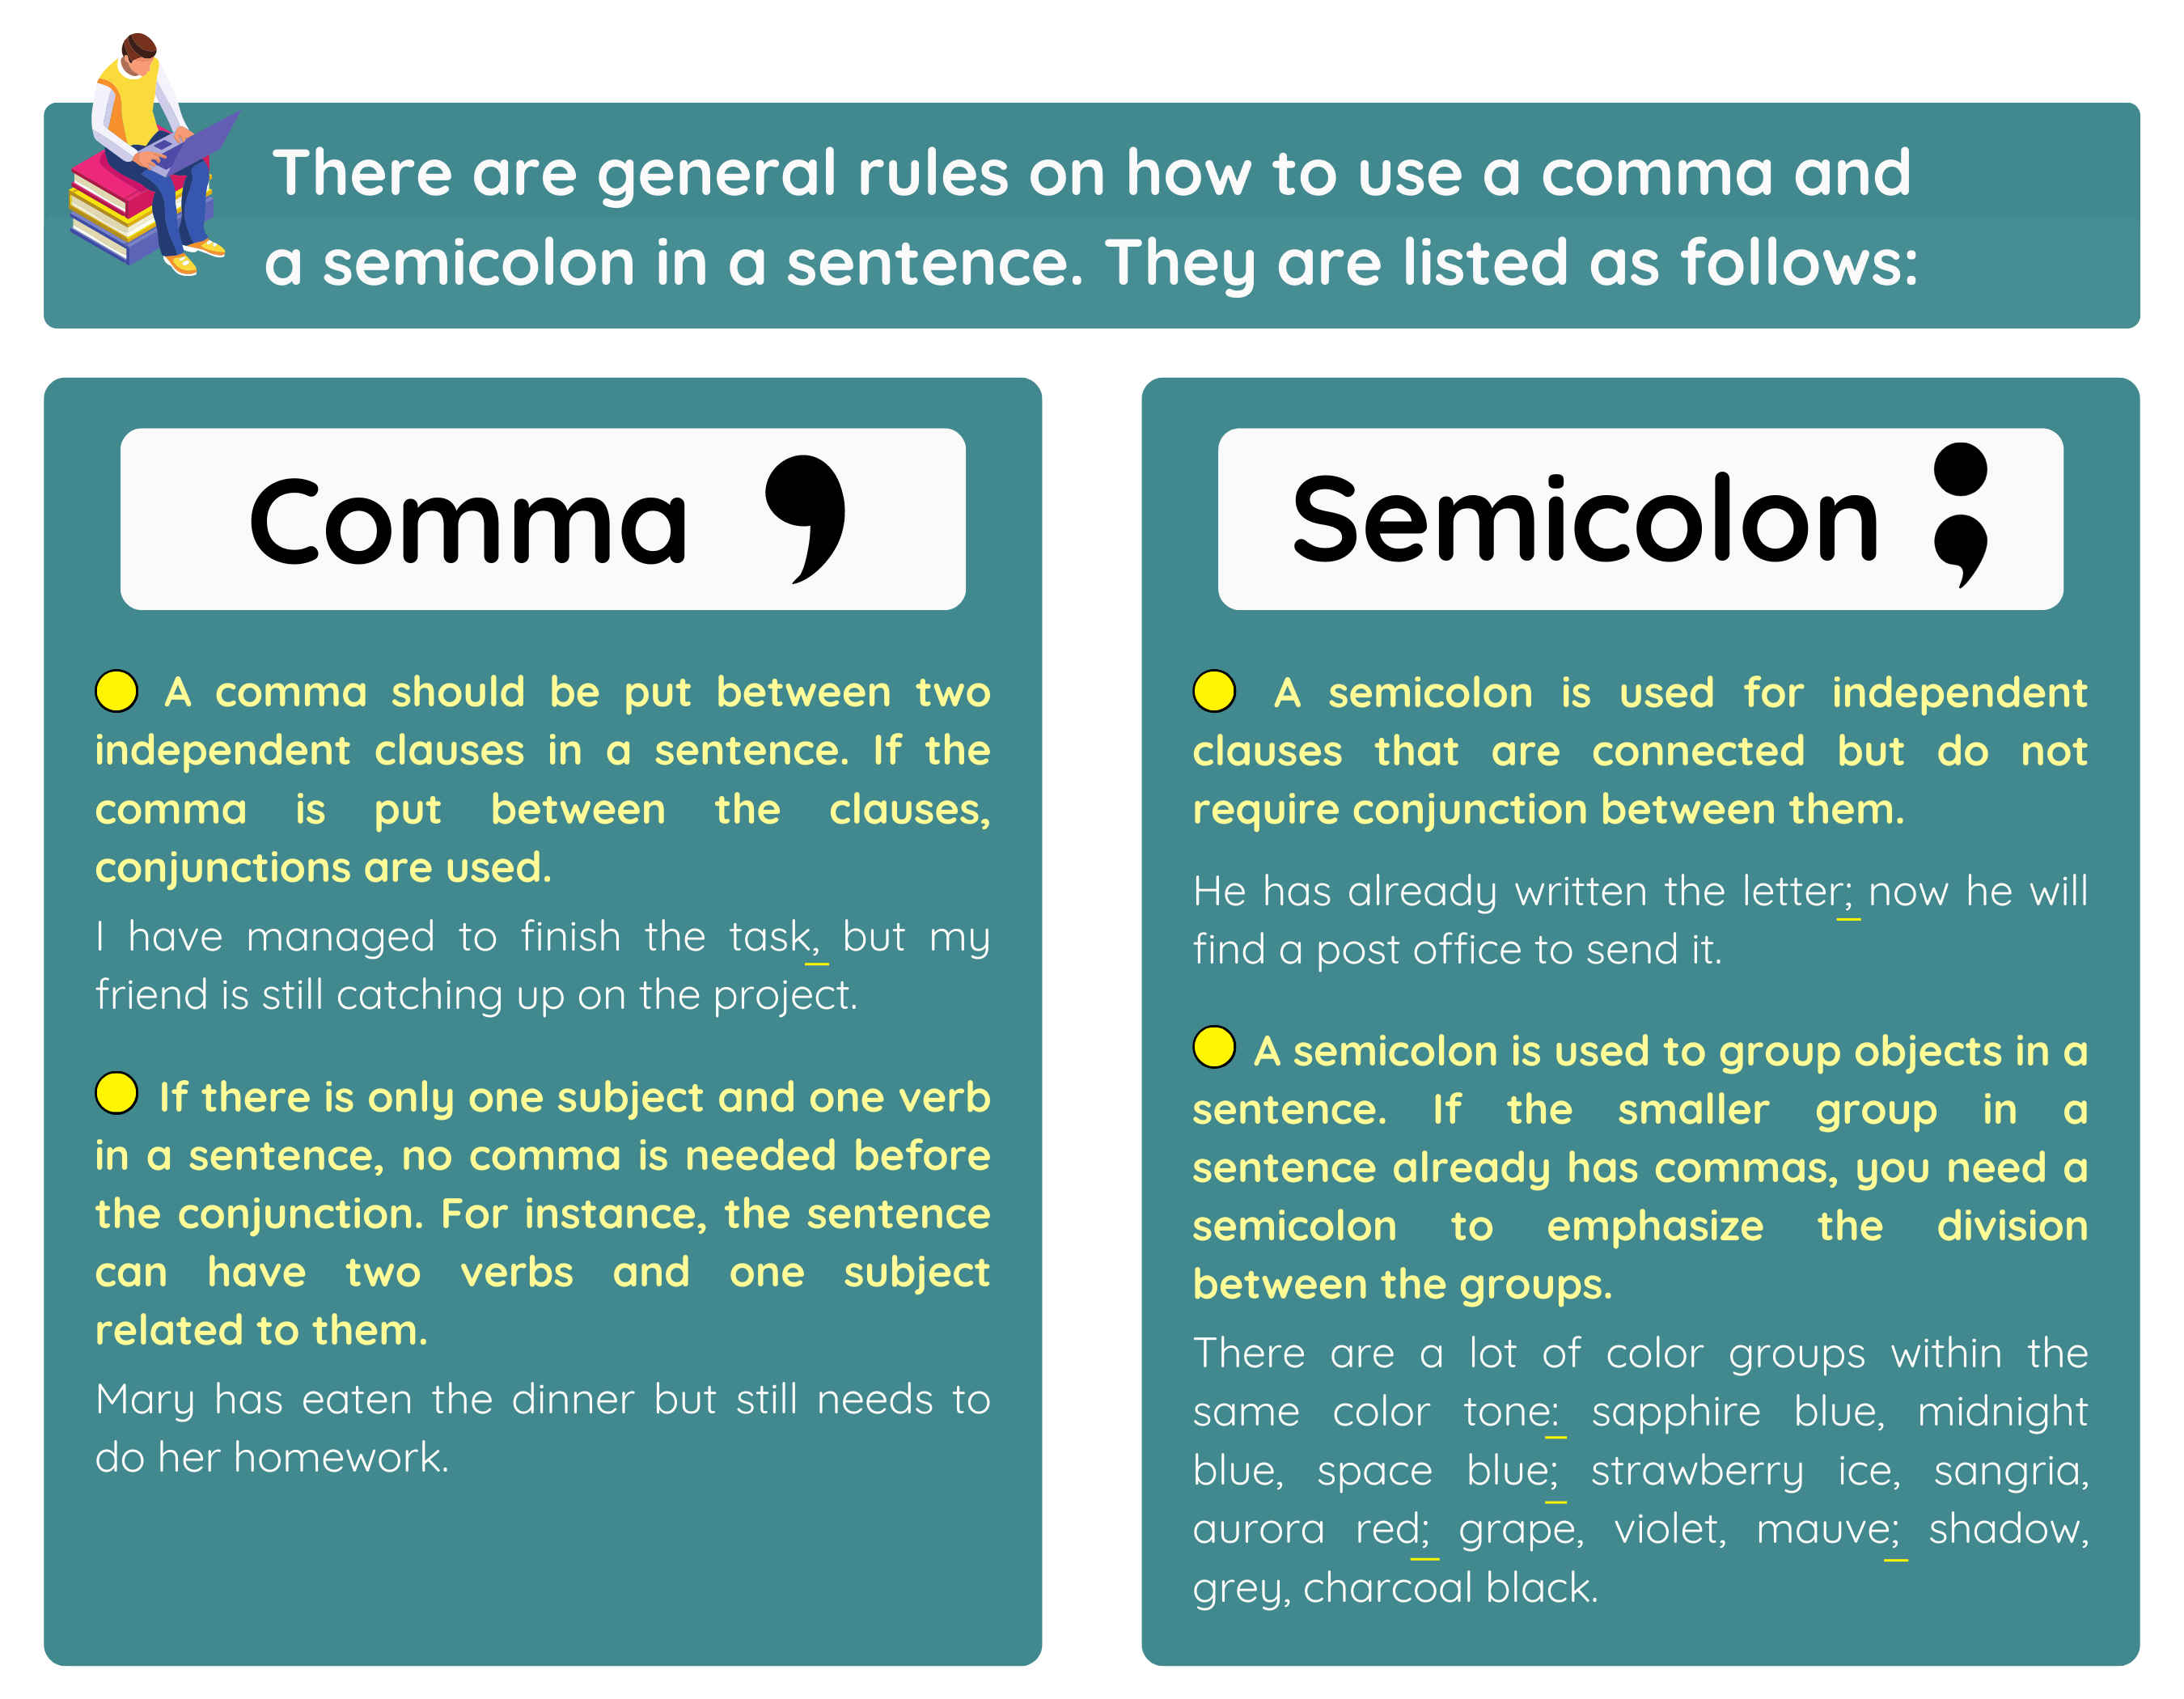 Infographic about comma and semicolon rules